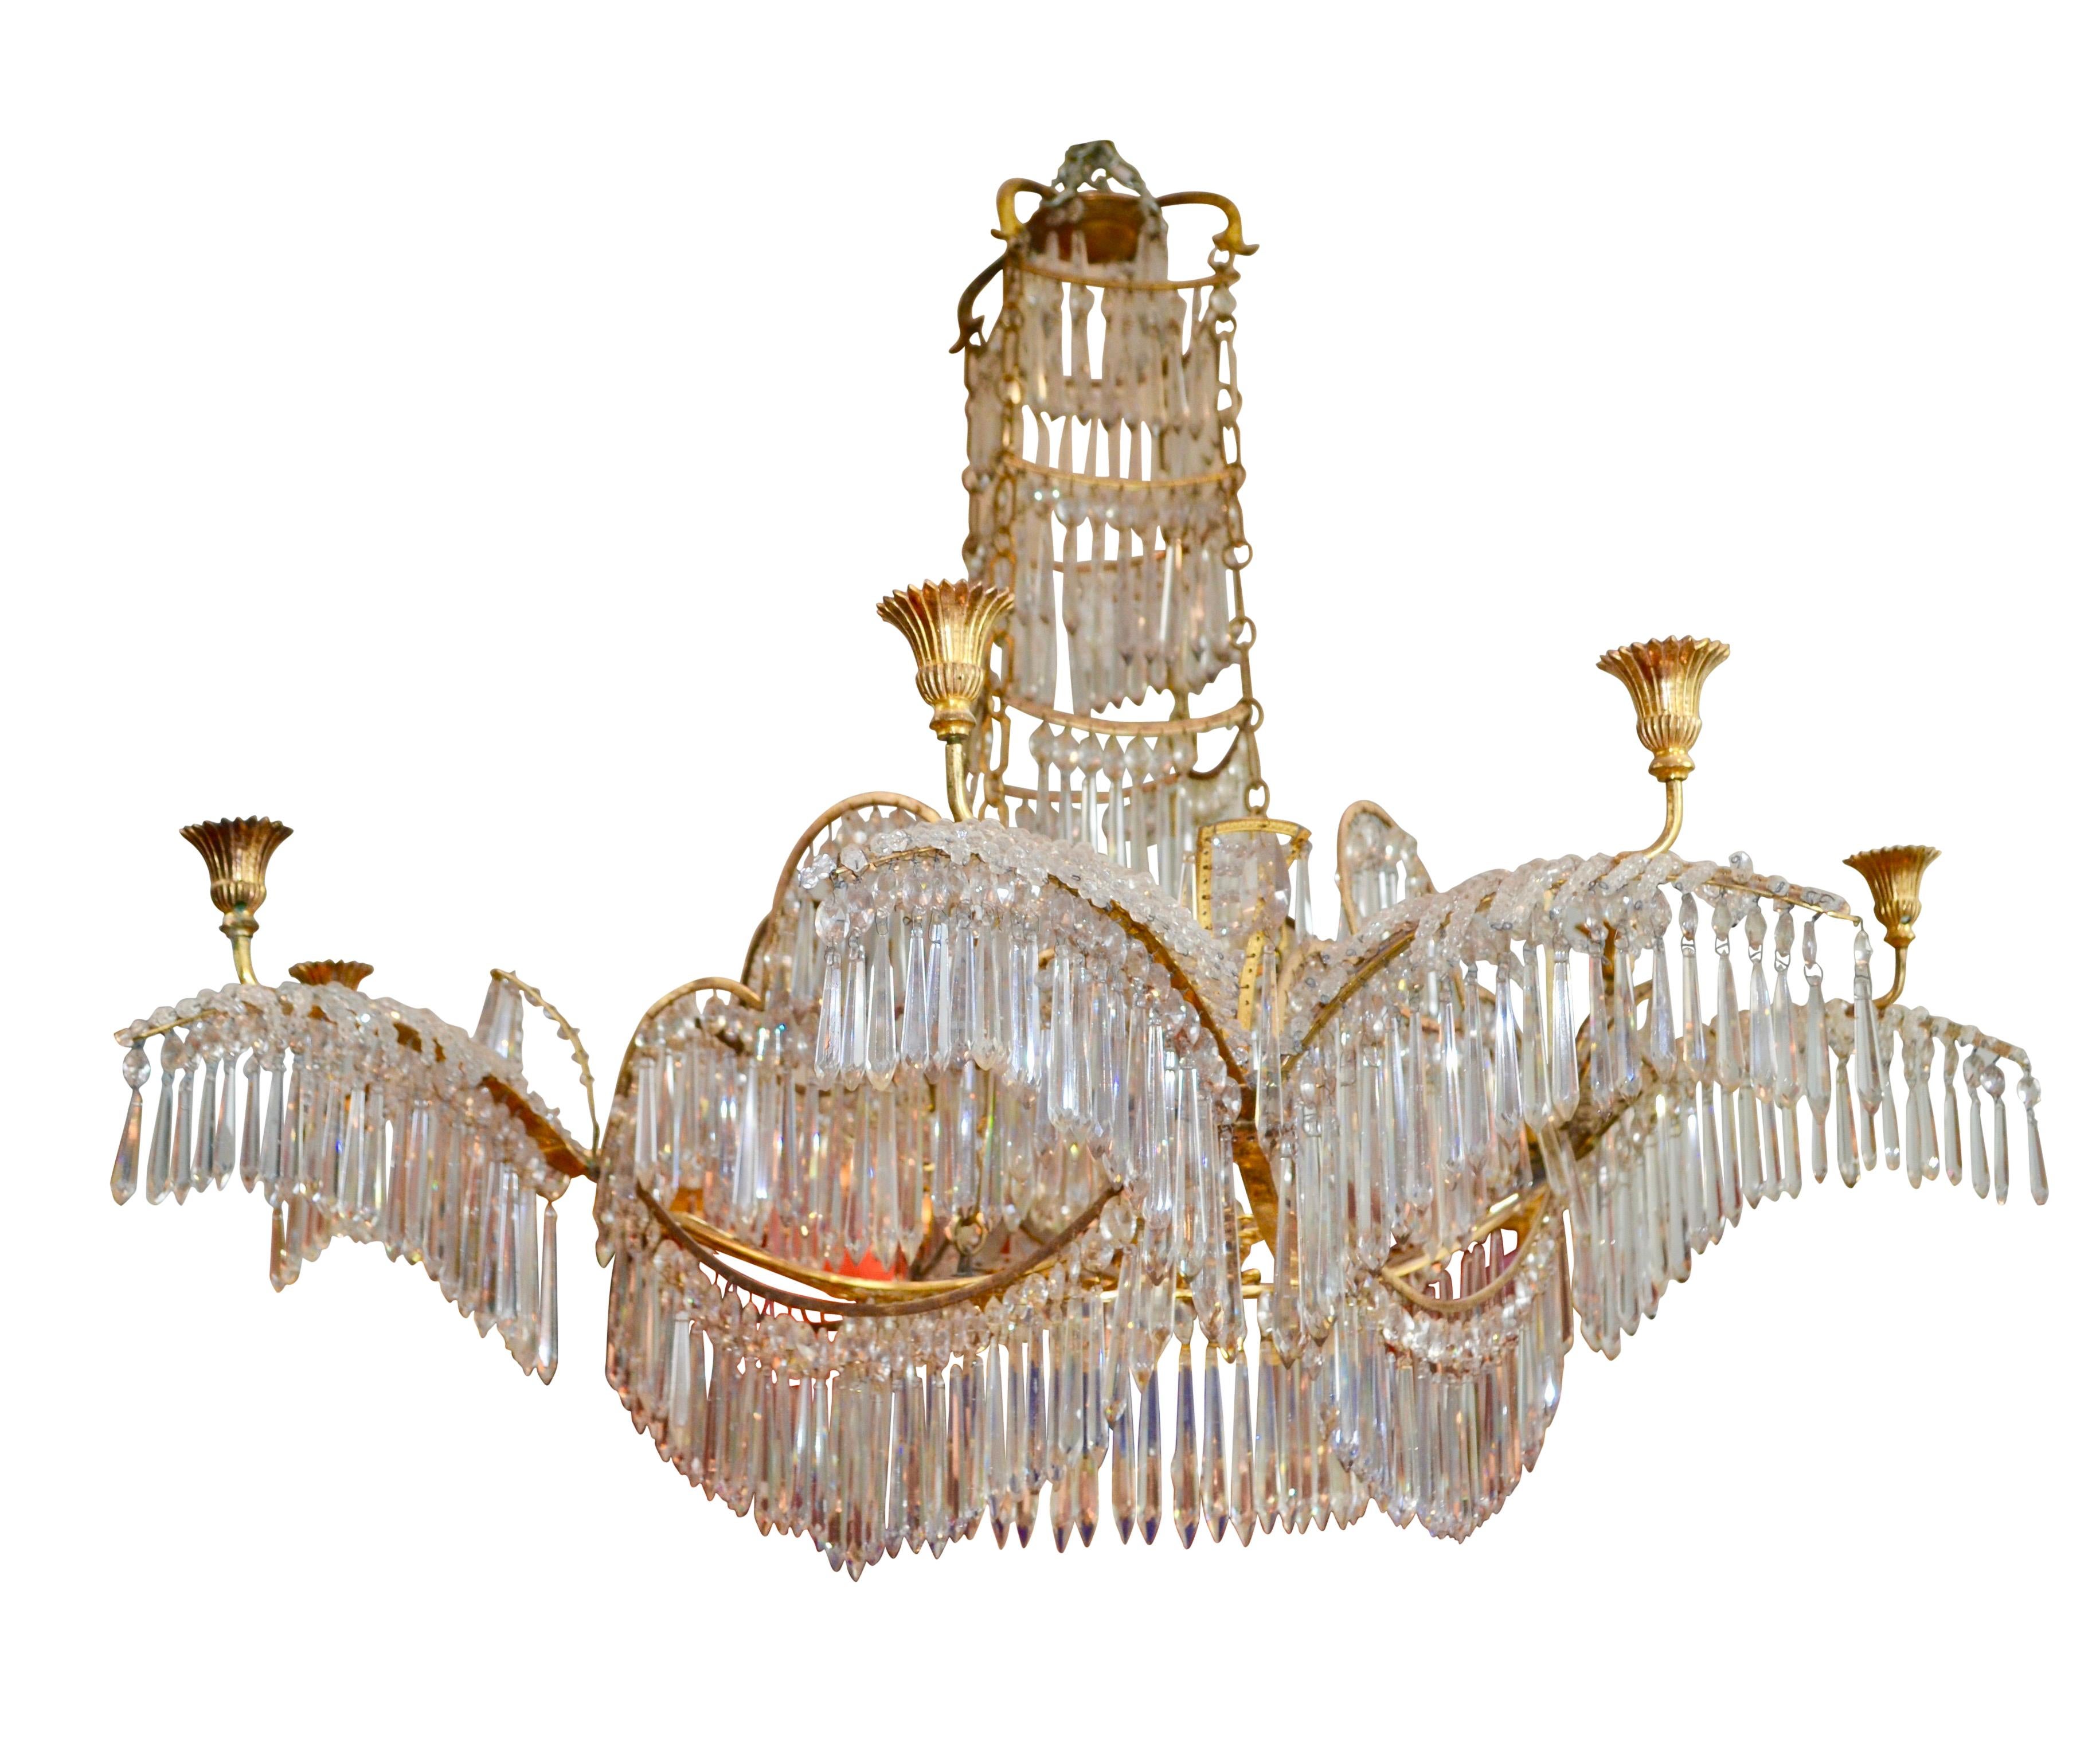 An early 19th century Russian chandelier having eight candle arms. The design is intended to represent waterfalls. The central stem of the chandelier is in four tiers each hung with original long cut crystals and almond shaped drops. The central